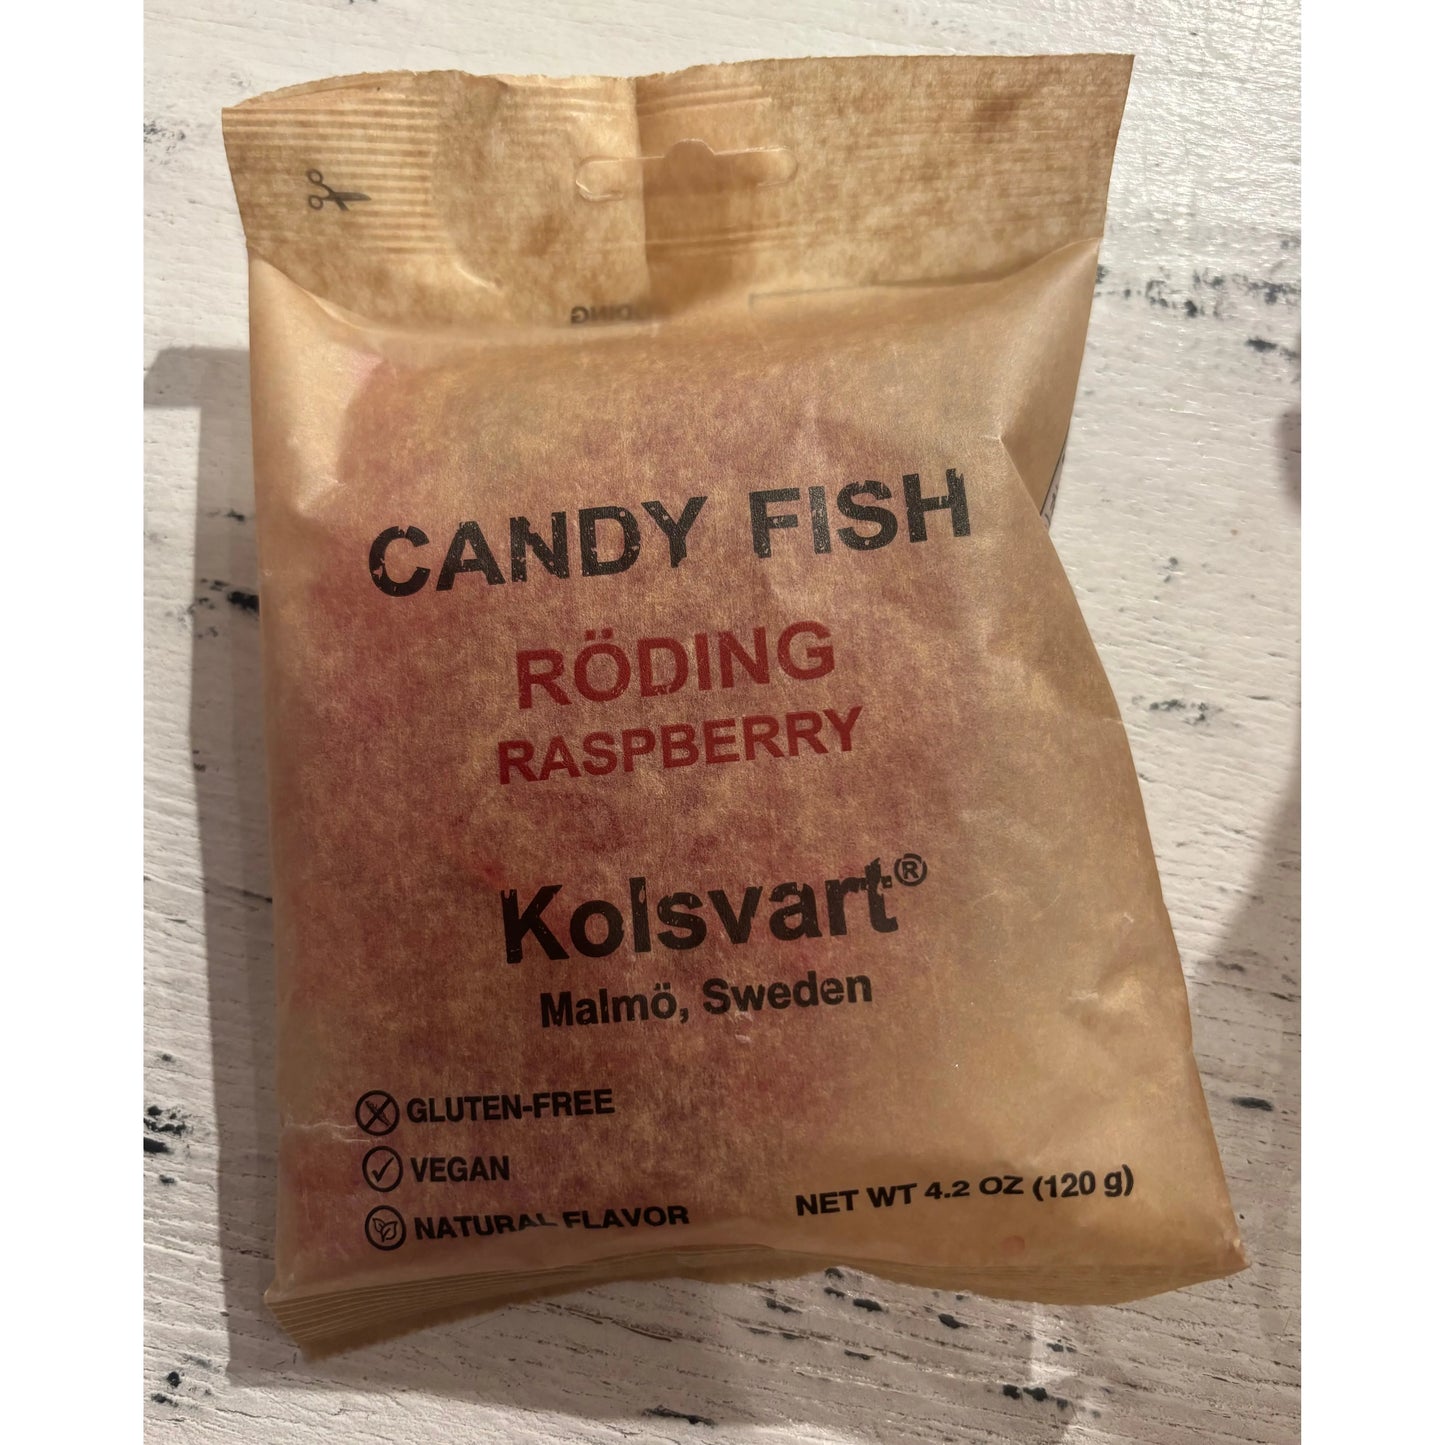 A package of Candy Fish Röding Raspberry - Kolsvart, labeled gluten-free, vegan, and natural, weighing 4.2 ounces, from Malmo, Sweden by Westerlind.